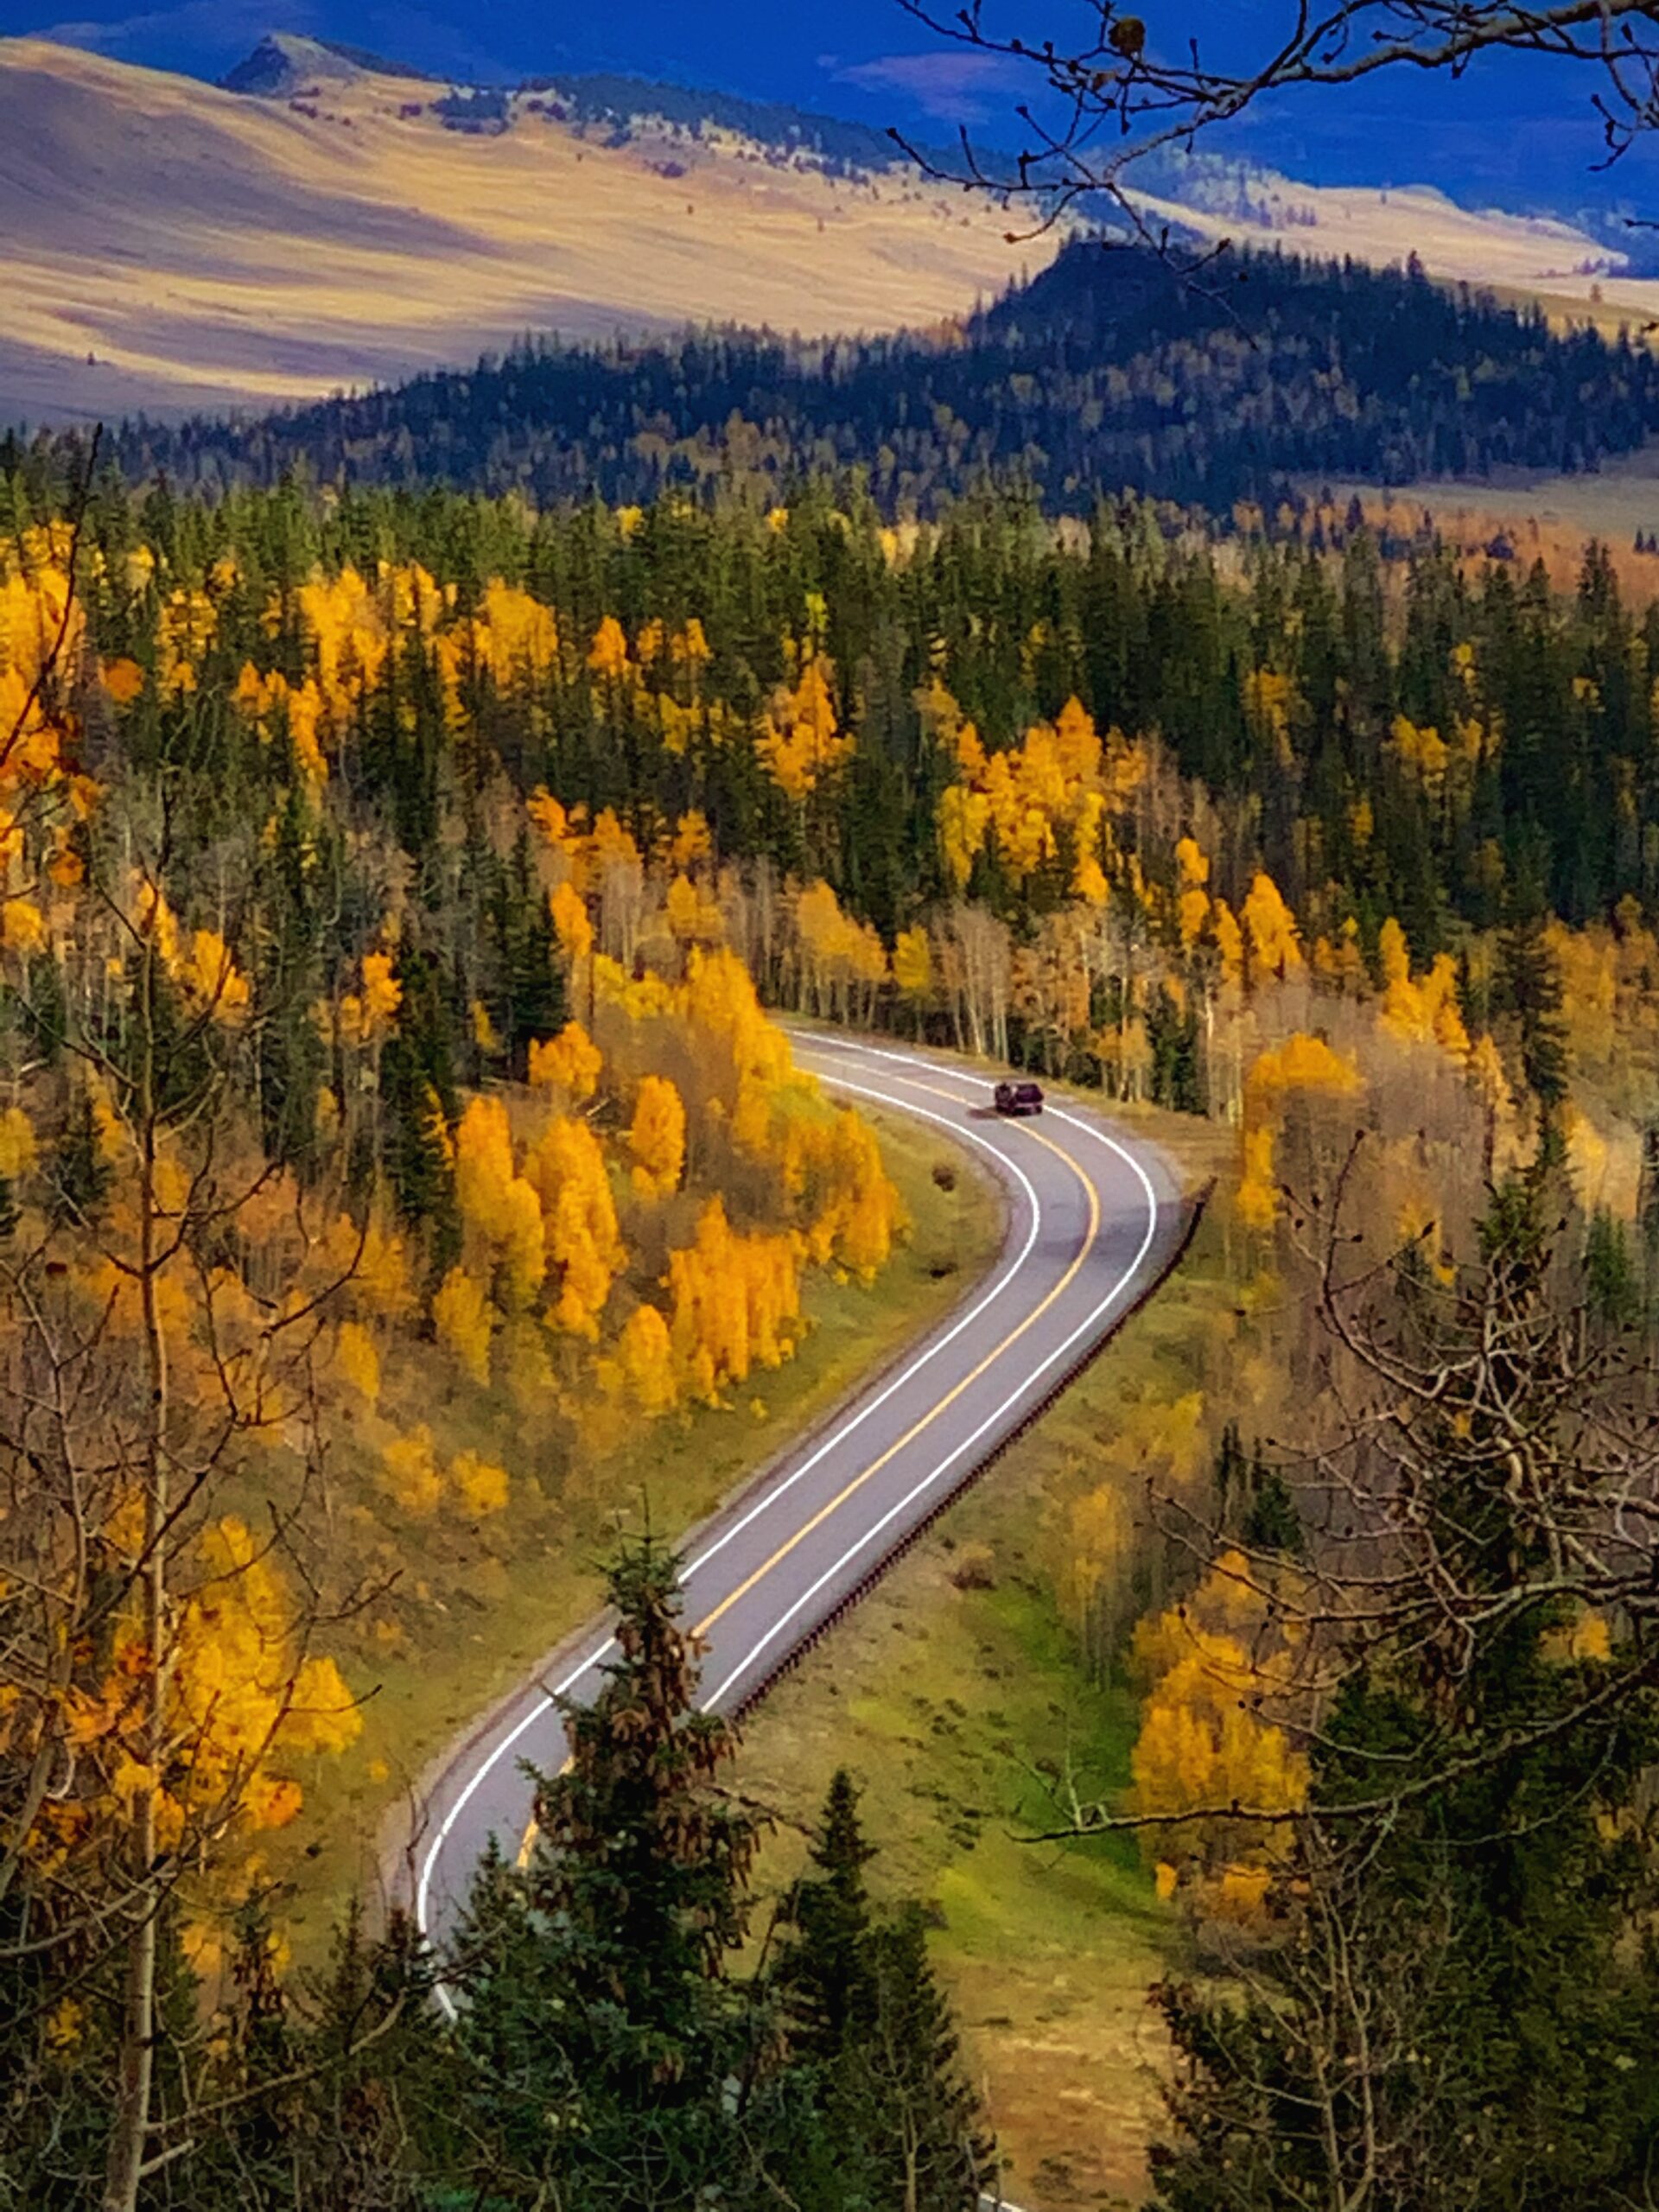 A winding road in the mountains with fall colors.